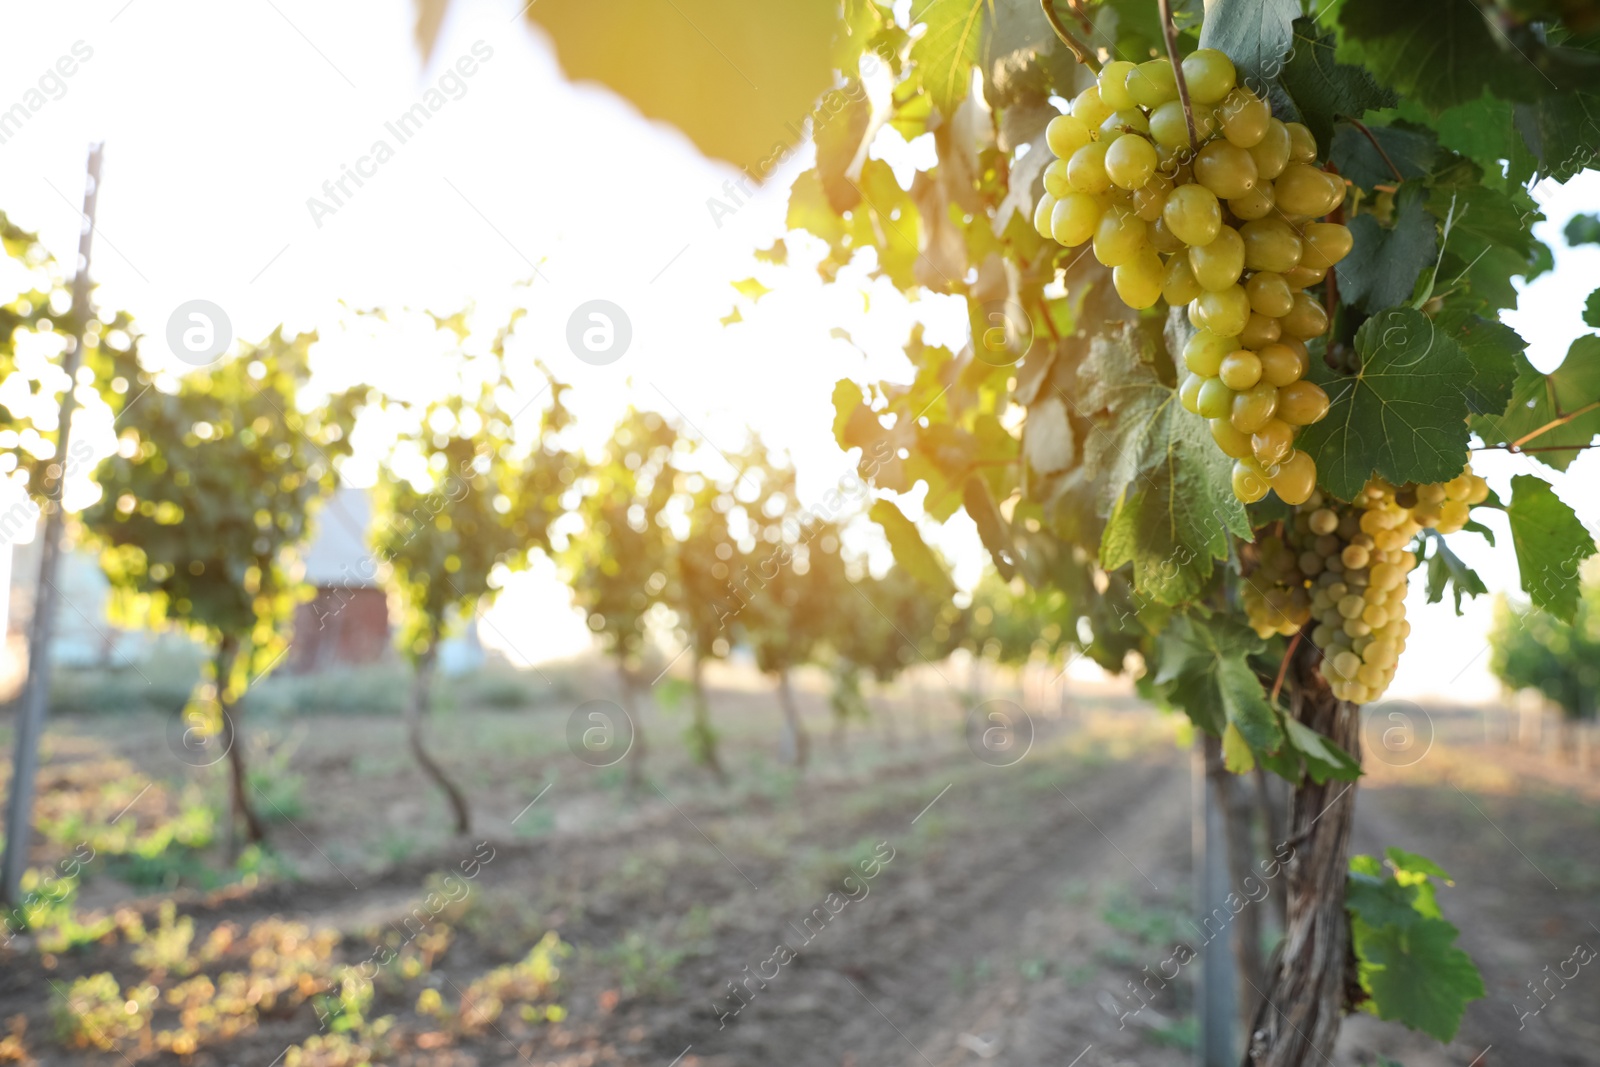 Photo of Bunch of ripe juicy grapes on branch in vineyard